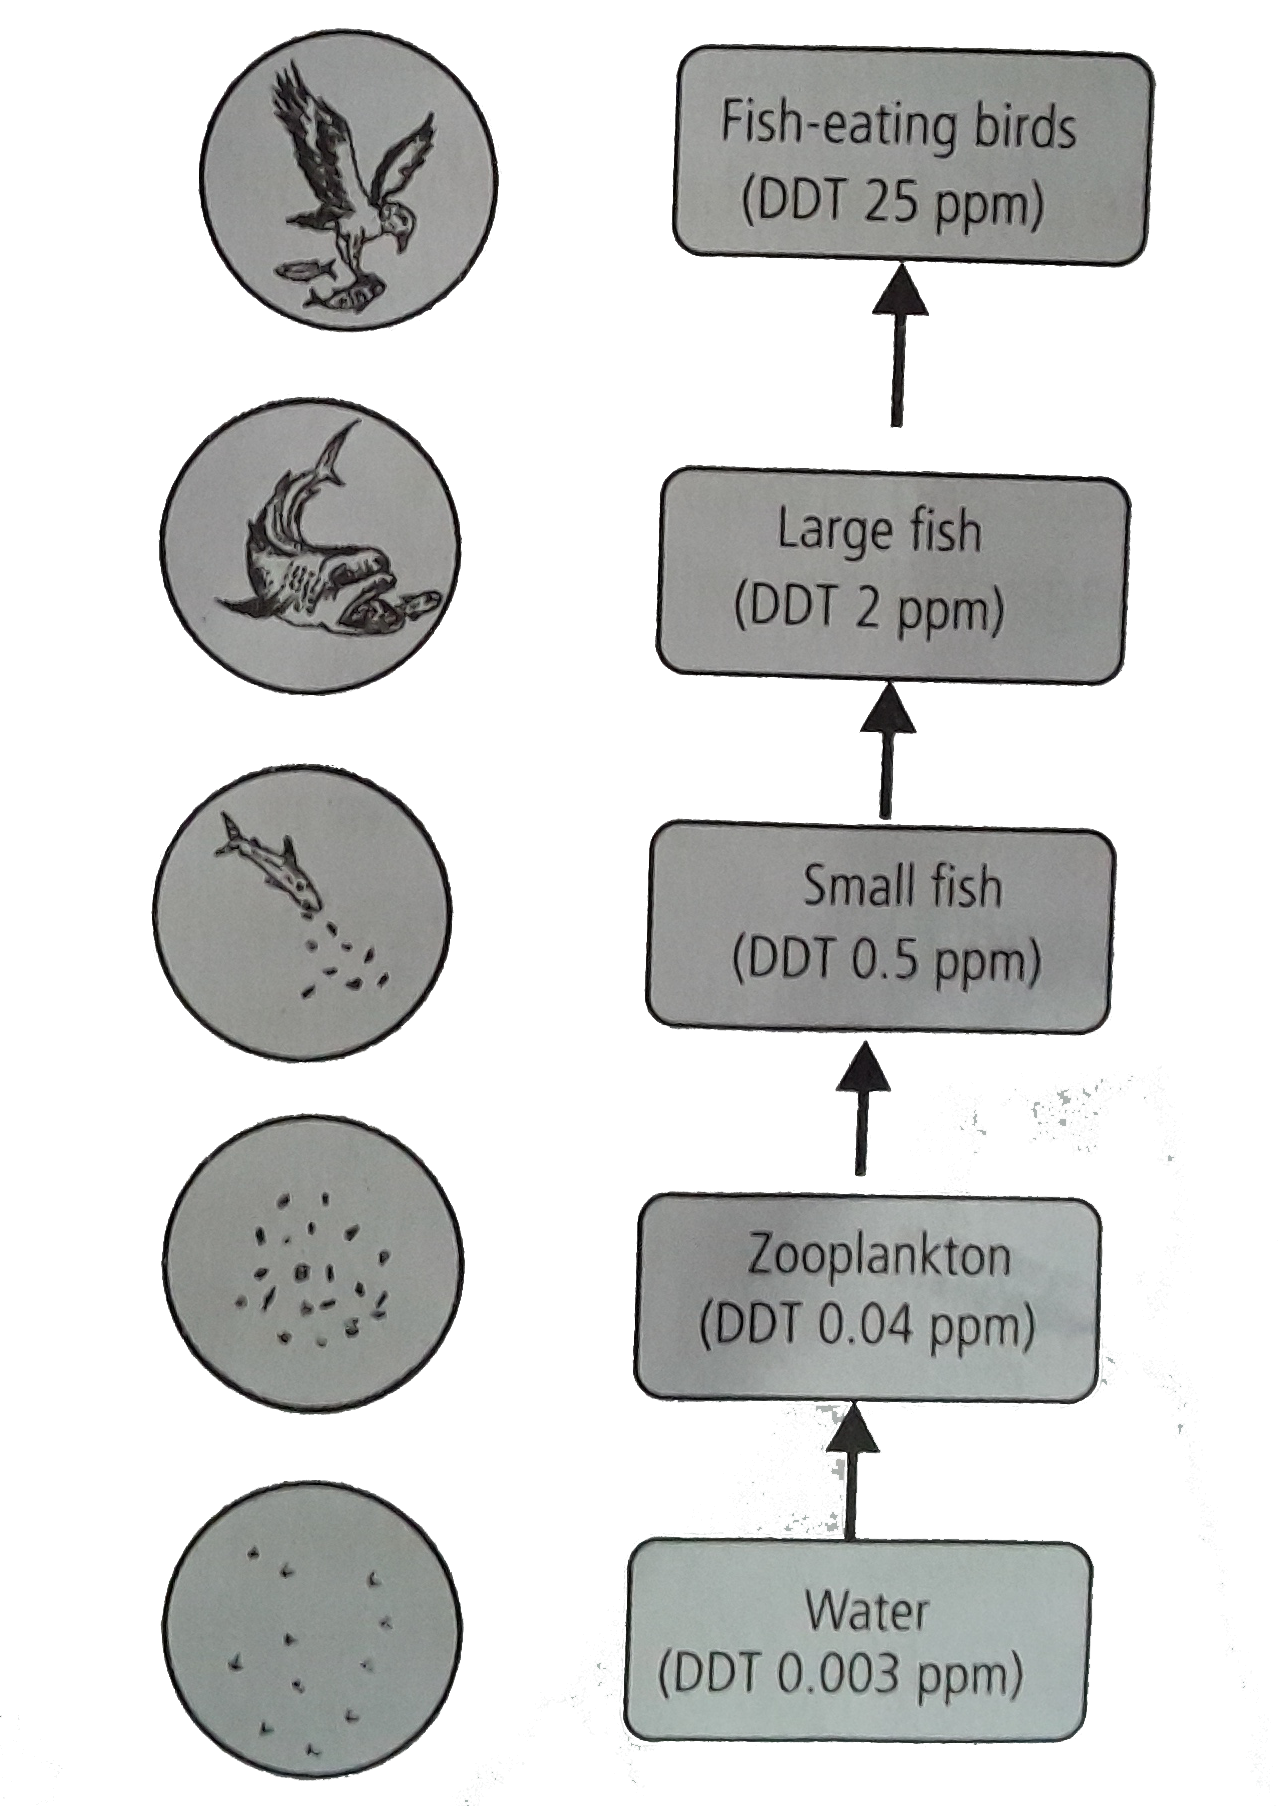 Given figure represents biomagnification of DDT in an aquatic food chain. Select the incorrect statement regarding this.